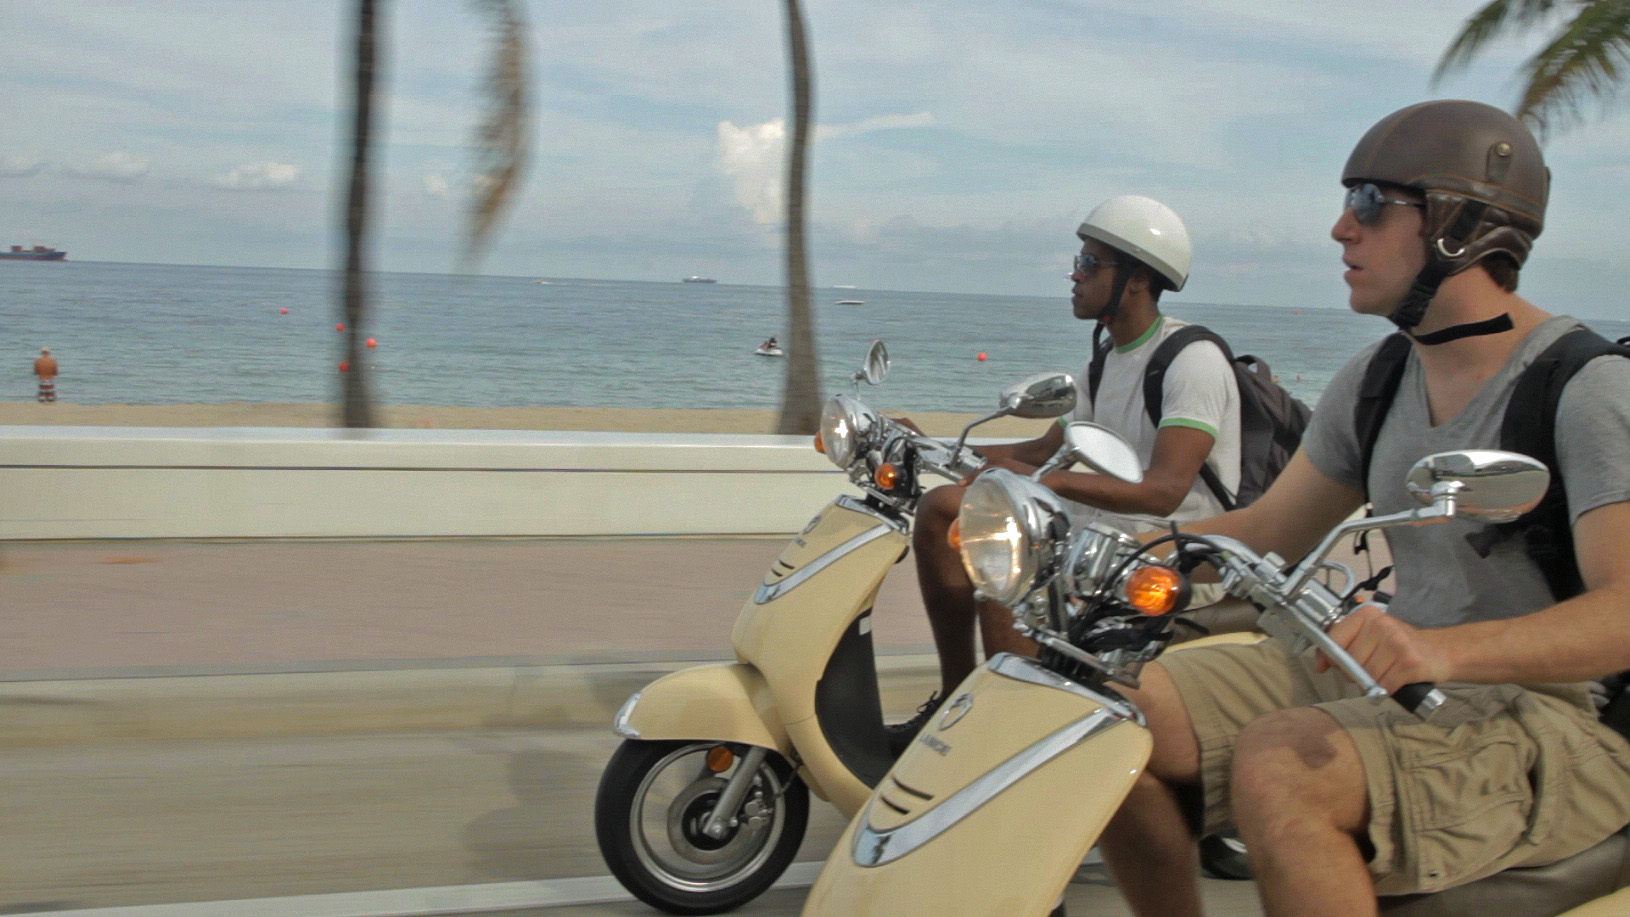 Side view of two men on scooters on a beach